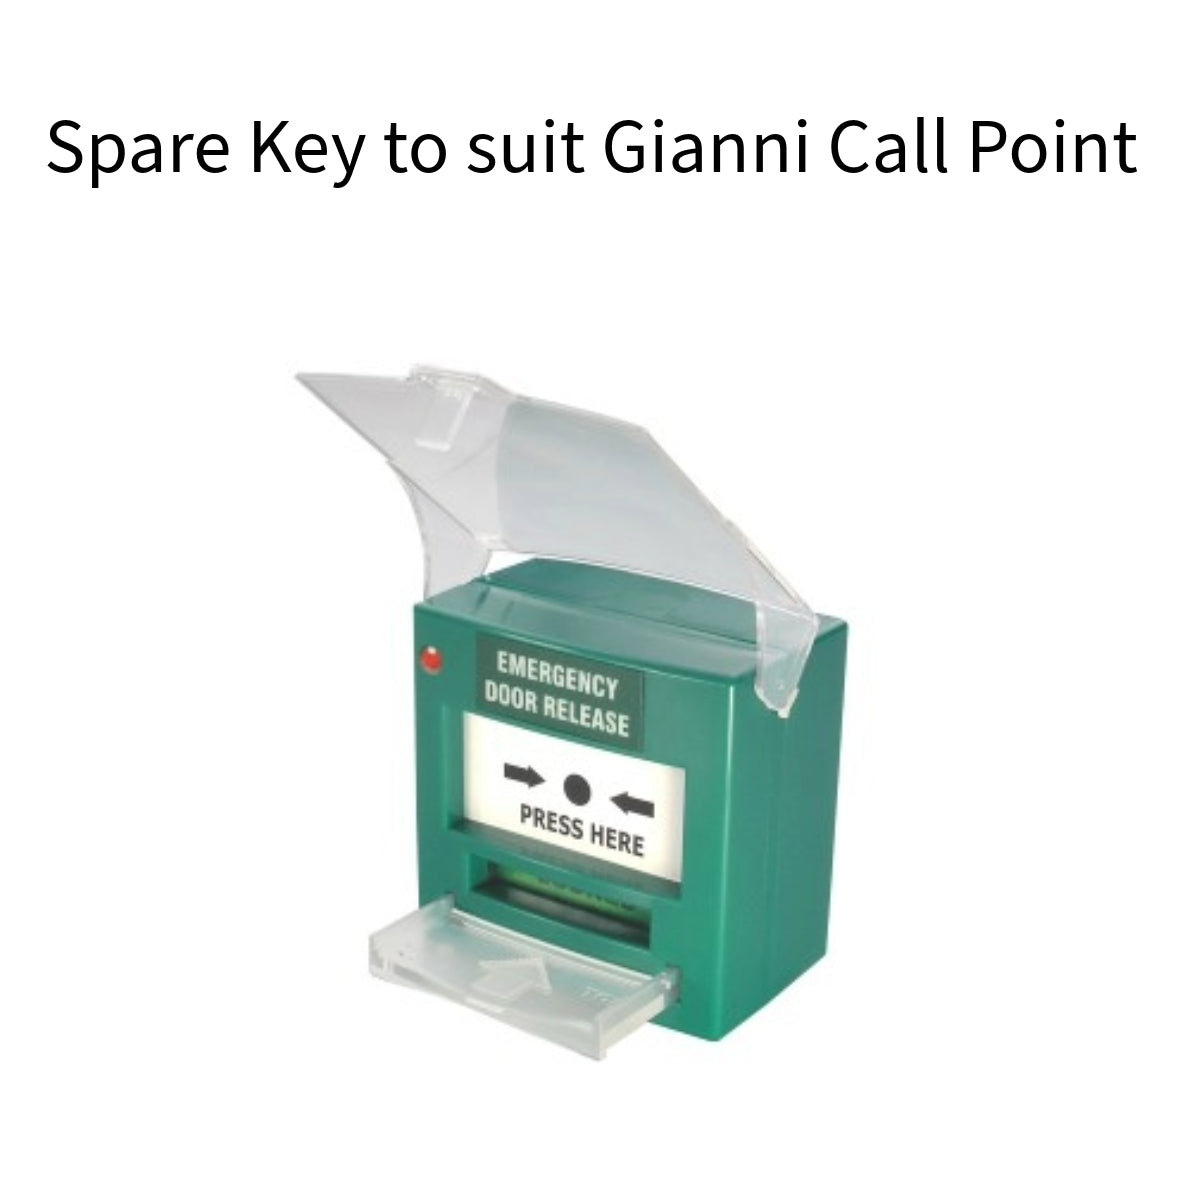 Compatible Call point for Gianni Spare Key 